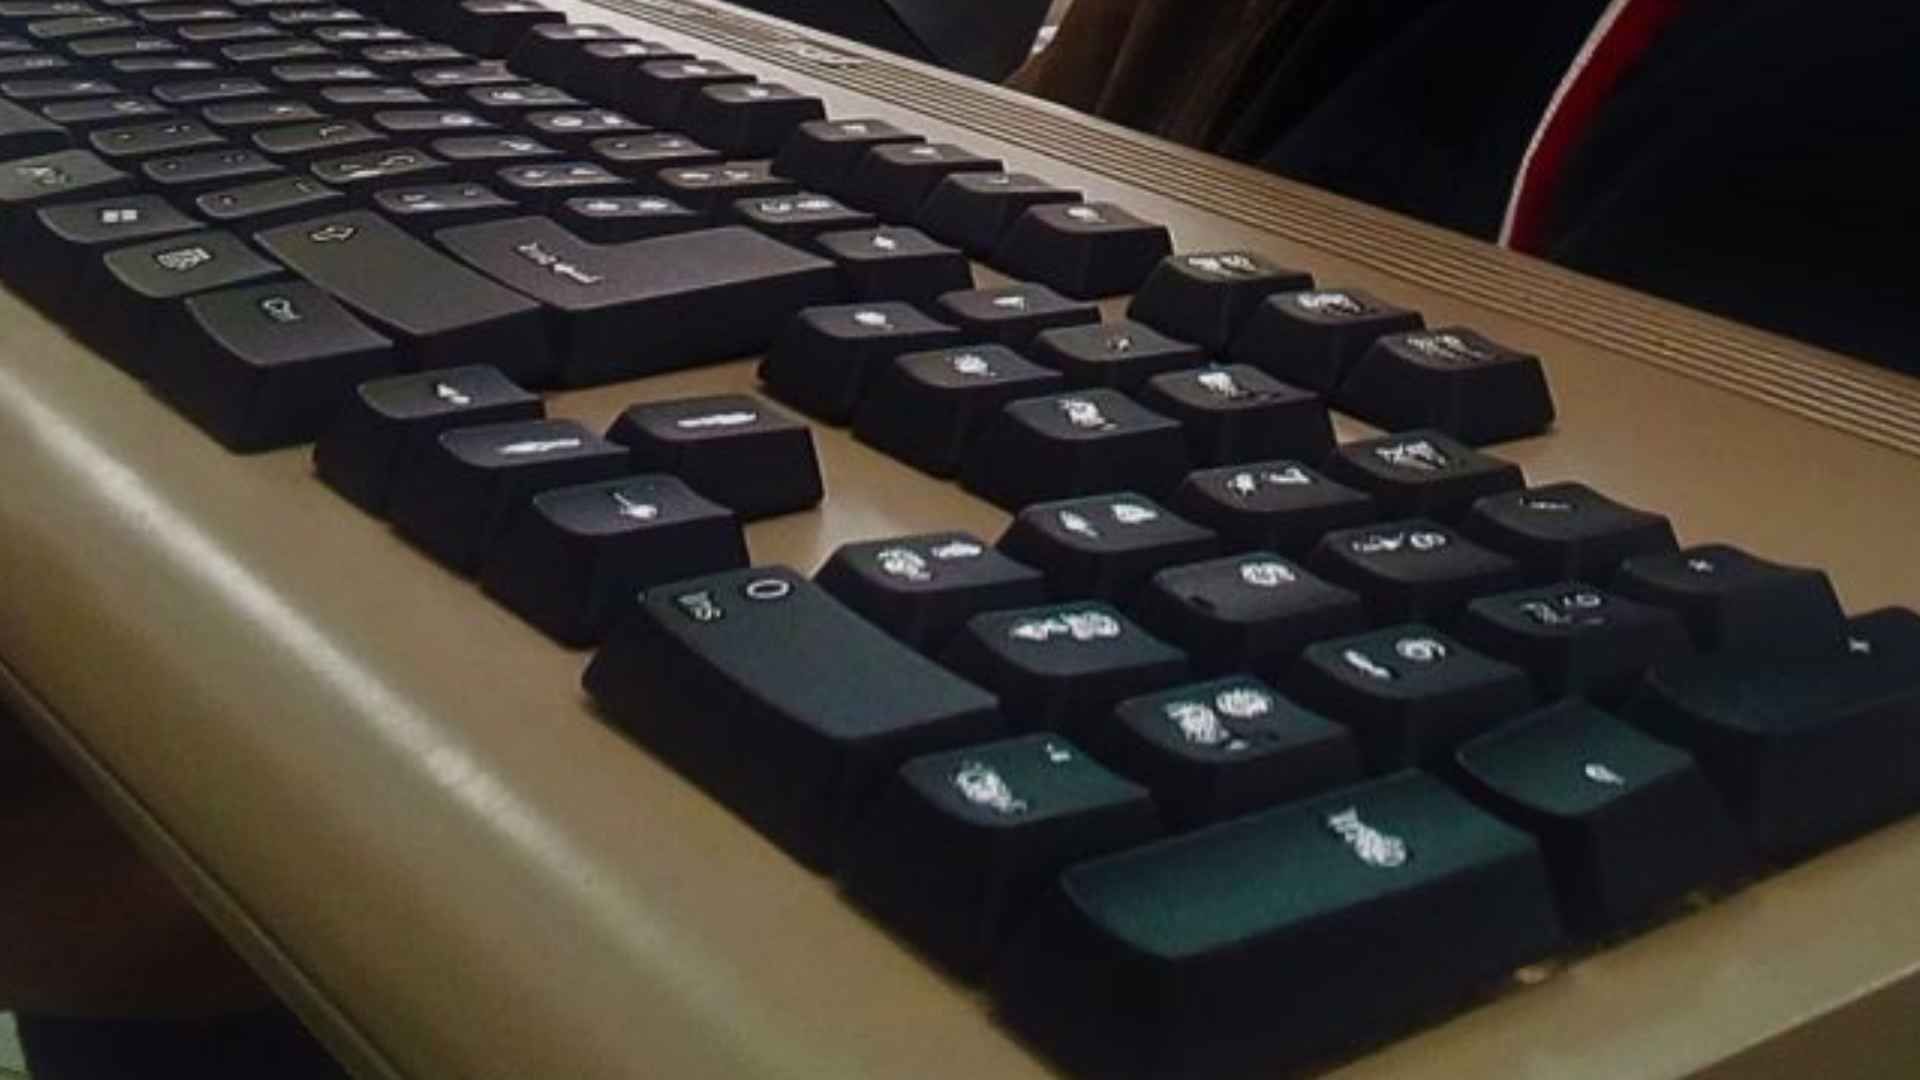 A close up of the GK64 keyboard